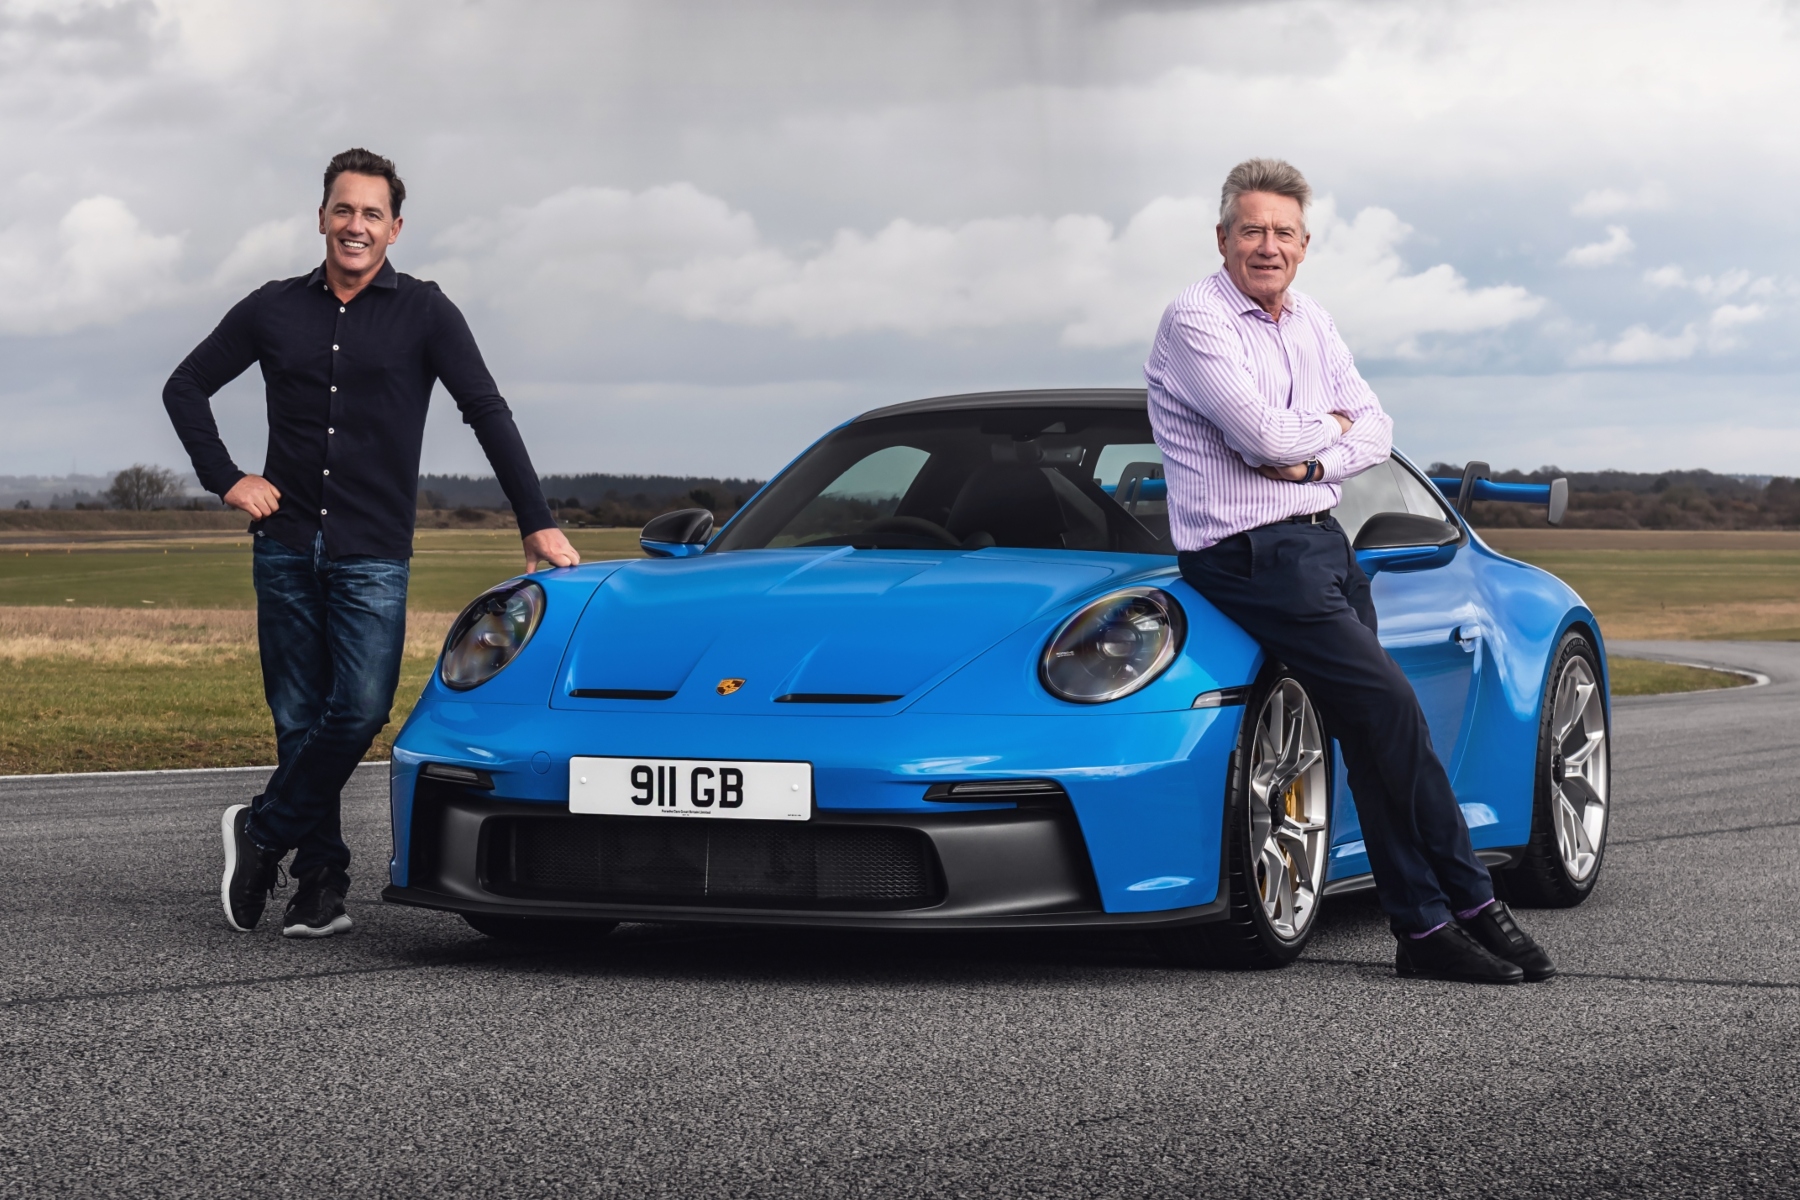 Lovecars On the Road Series 2 with Paul Woodman and Tiff Needell